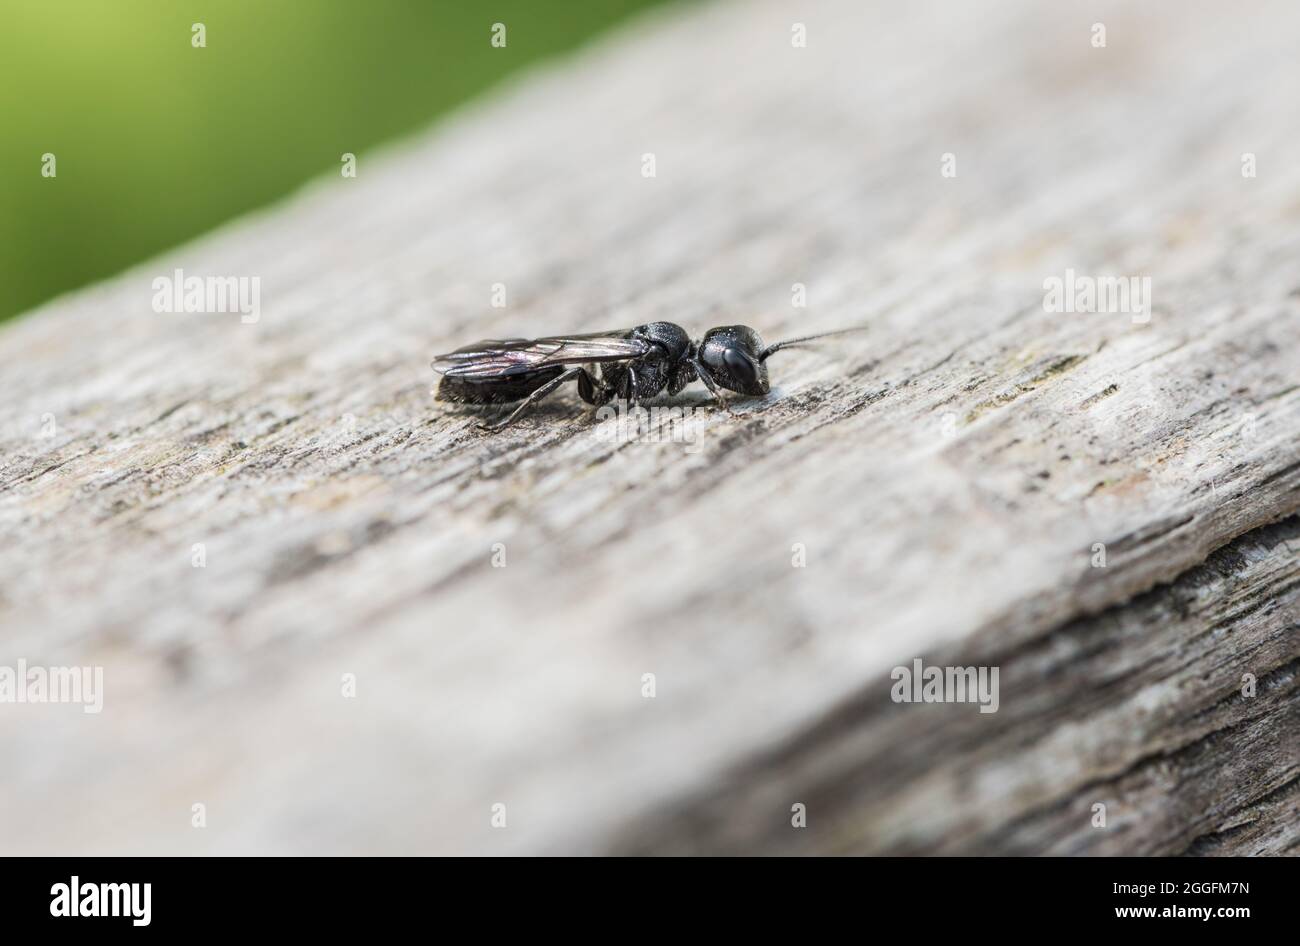 A type of 'mournful' digger wasp - a Pemphredon sp. Stock Photo